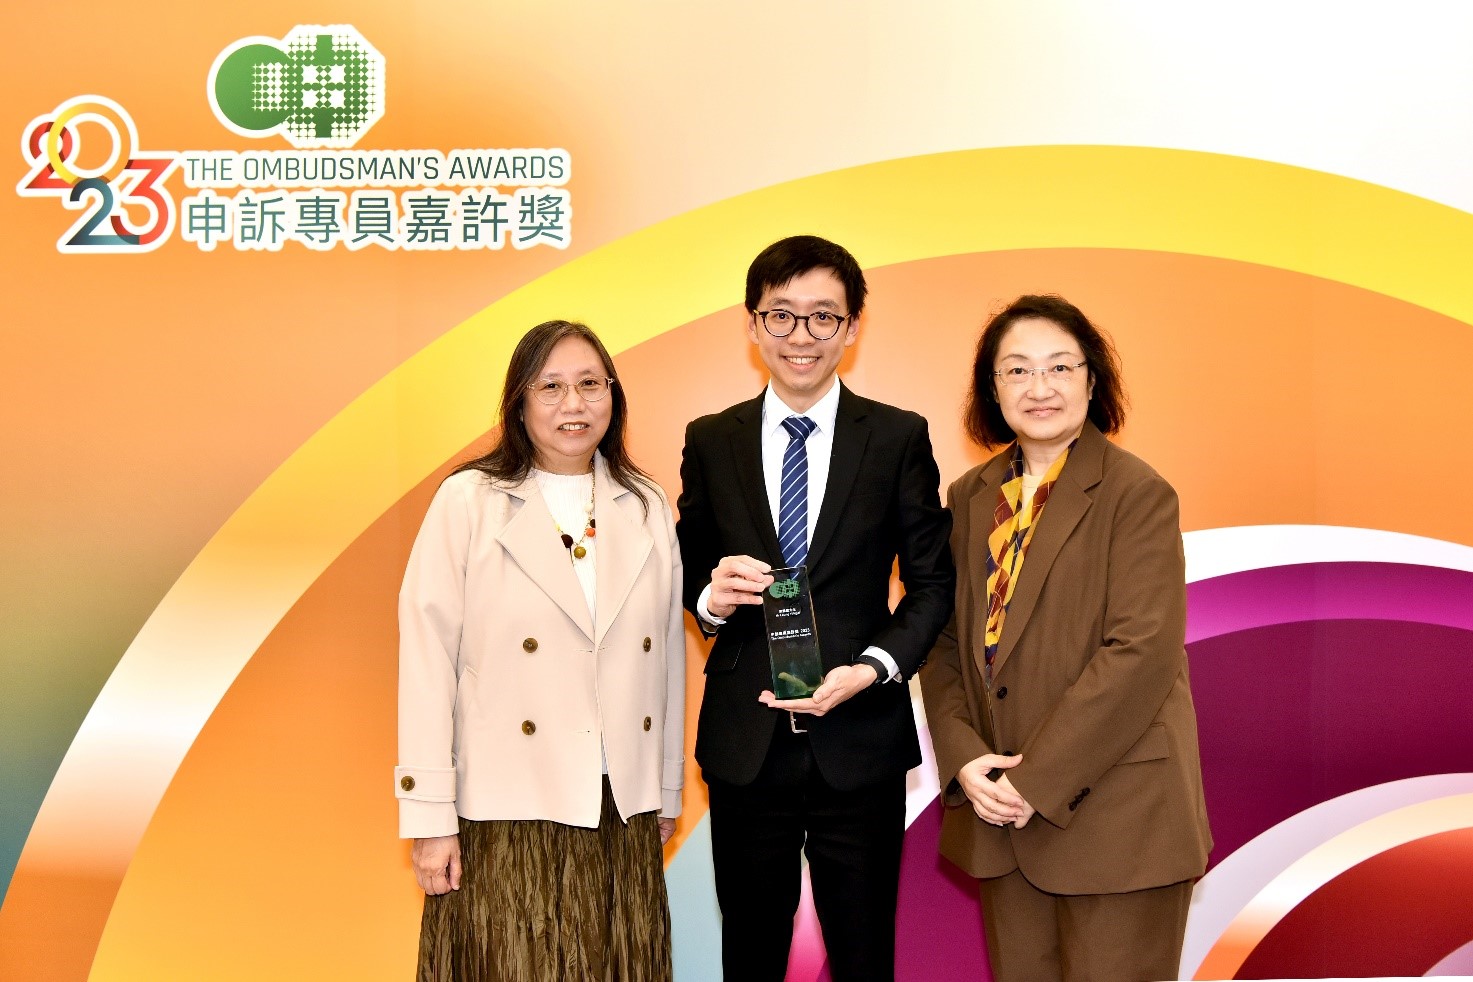 Miss Helen Tang, Registrar of Companies (right), Ms Marianna Yu, Registry Manager (left) and the awardee Mr Michael Leung, Companies Registration Officer I (middle) at the Award Presentation Ceremony.